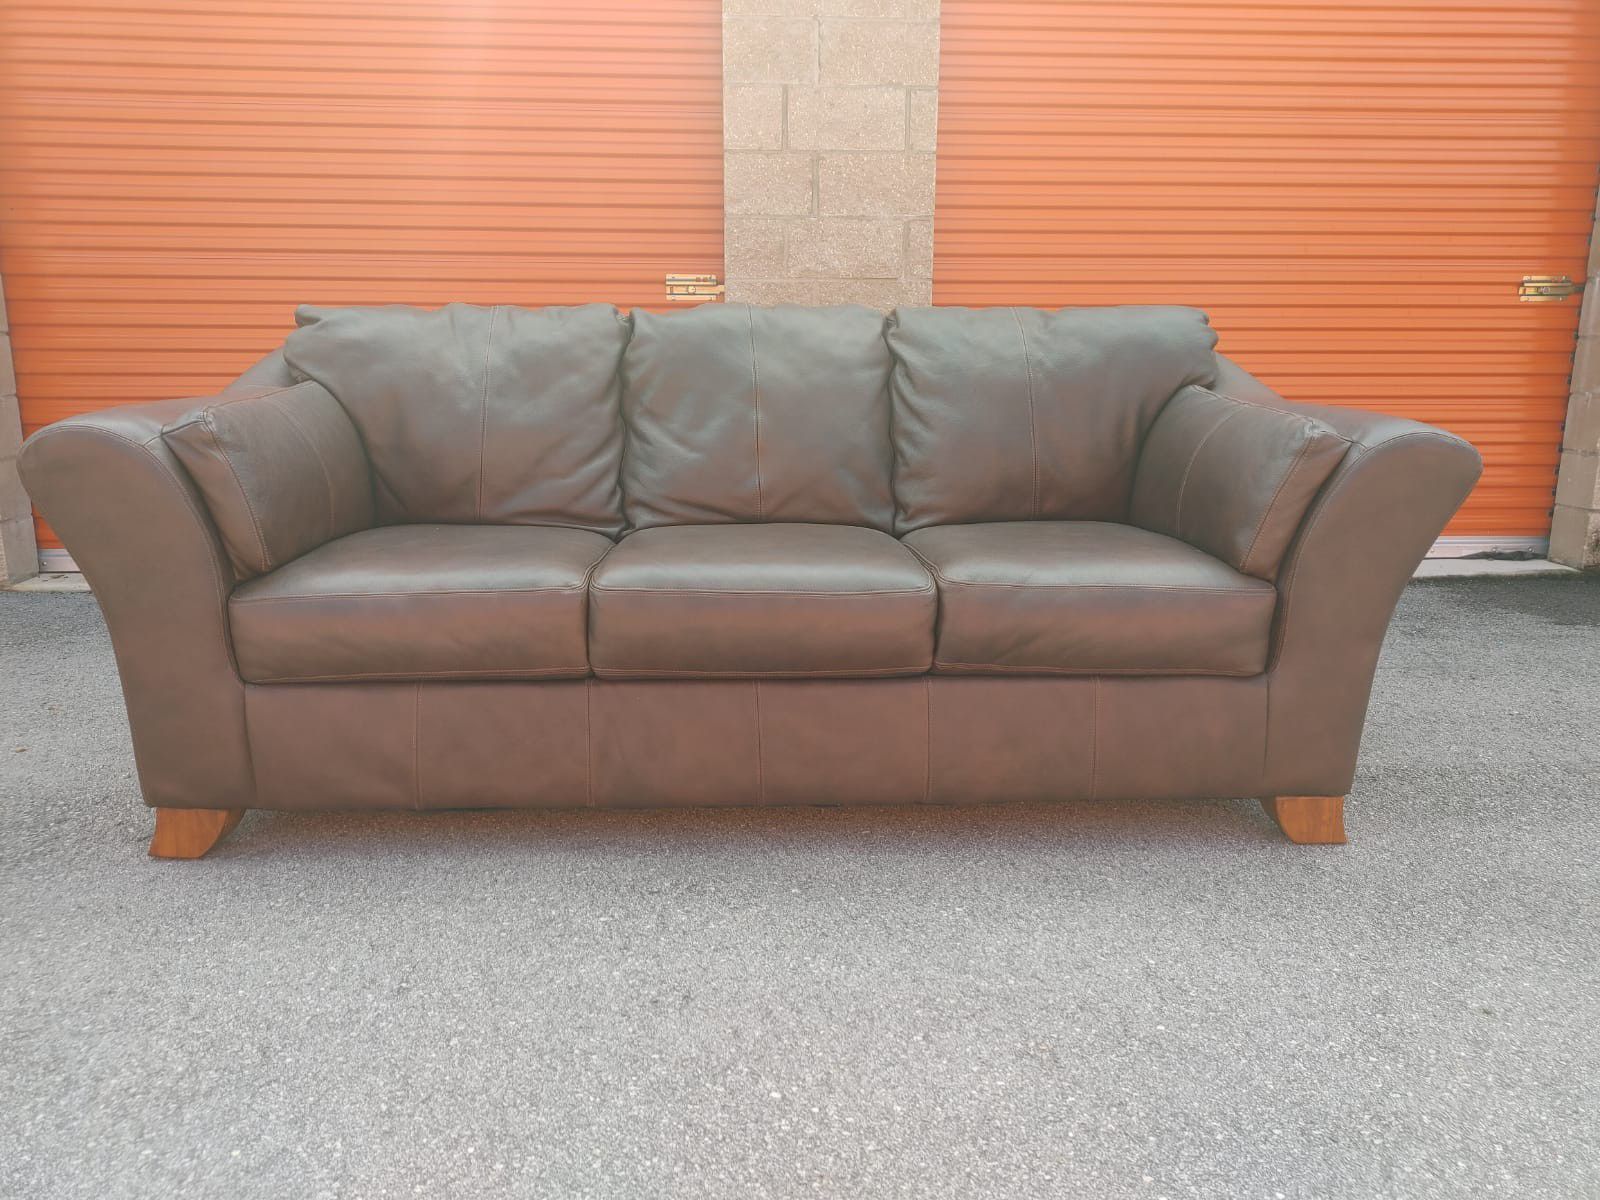 ASHLEY FURNITURE - REAL/ GENUINE Brown Leather sofa/couch - Extremely Comfortable - LIKE NEW CONDITION ( Almost Never Used) - DELIVERY NEGOTIABLE